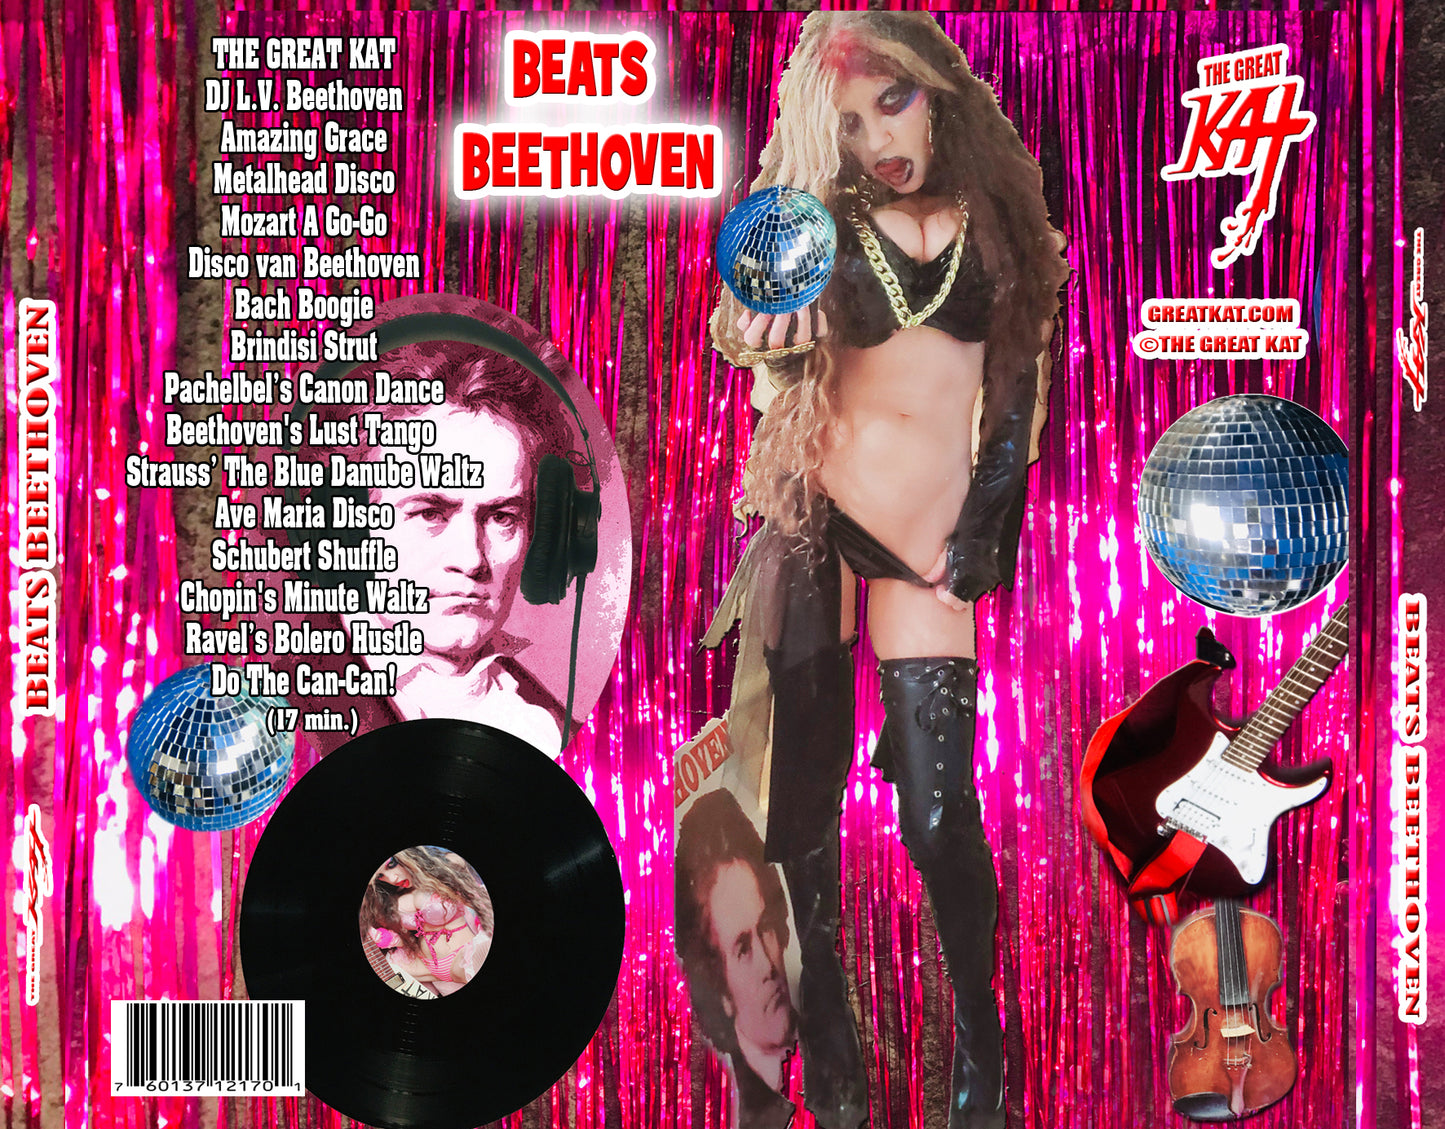 NEW “BEATS BEETHOVEN” 15-Song CD Album (17 Min) by THE GREAT KAT! PERSONALIZED AUTOGRAPHED by THE GREAT KAT to Customer! With "DJ L.V. Beethoven", "Disco van Beethoven", "Amazing Grace" & MORE!